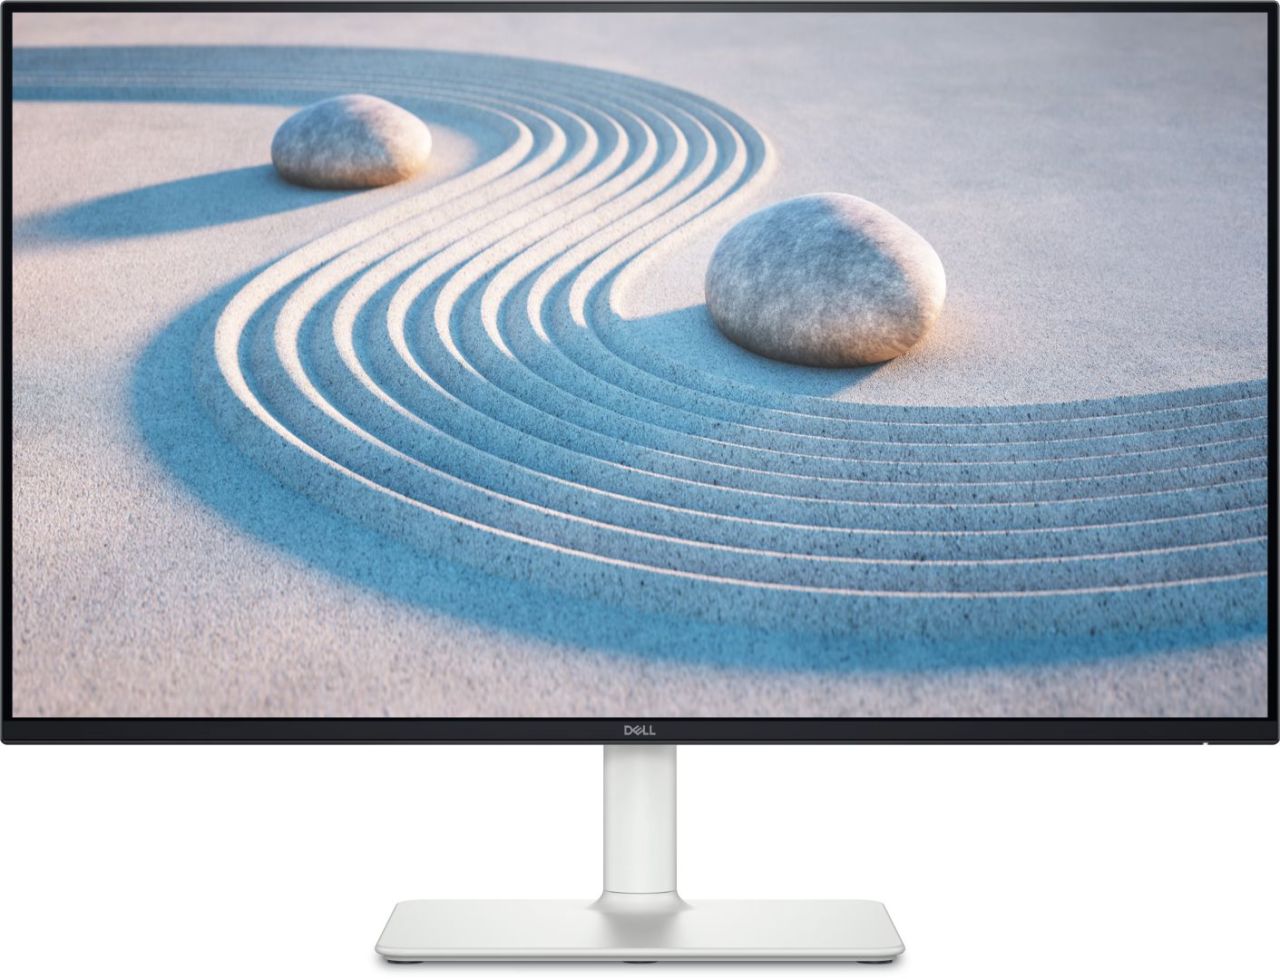 Dell 27" S2725DS IPS LED